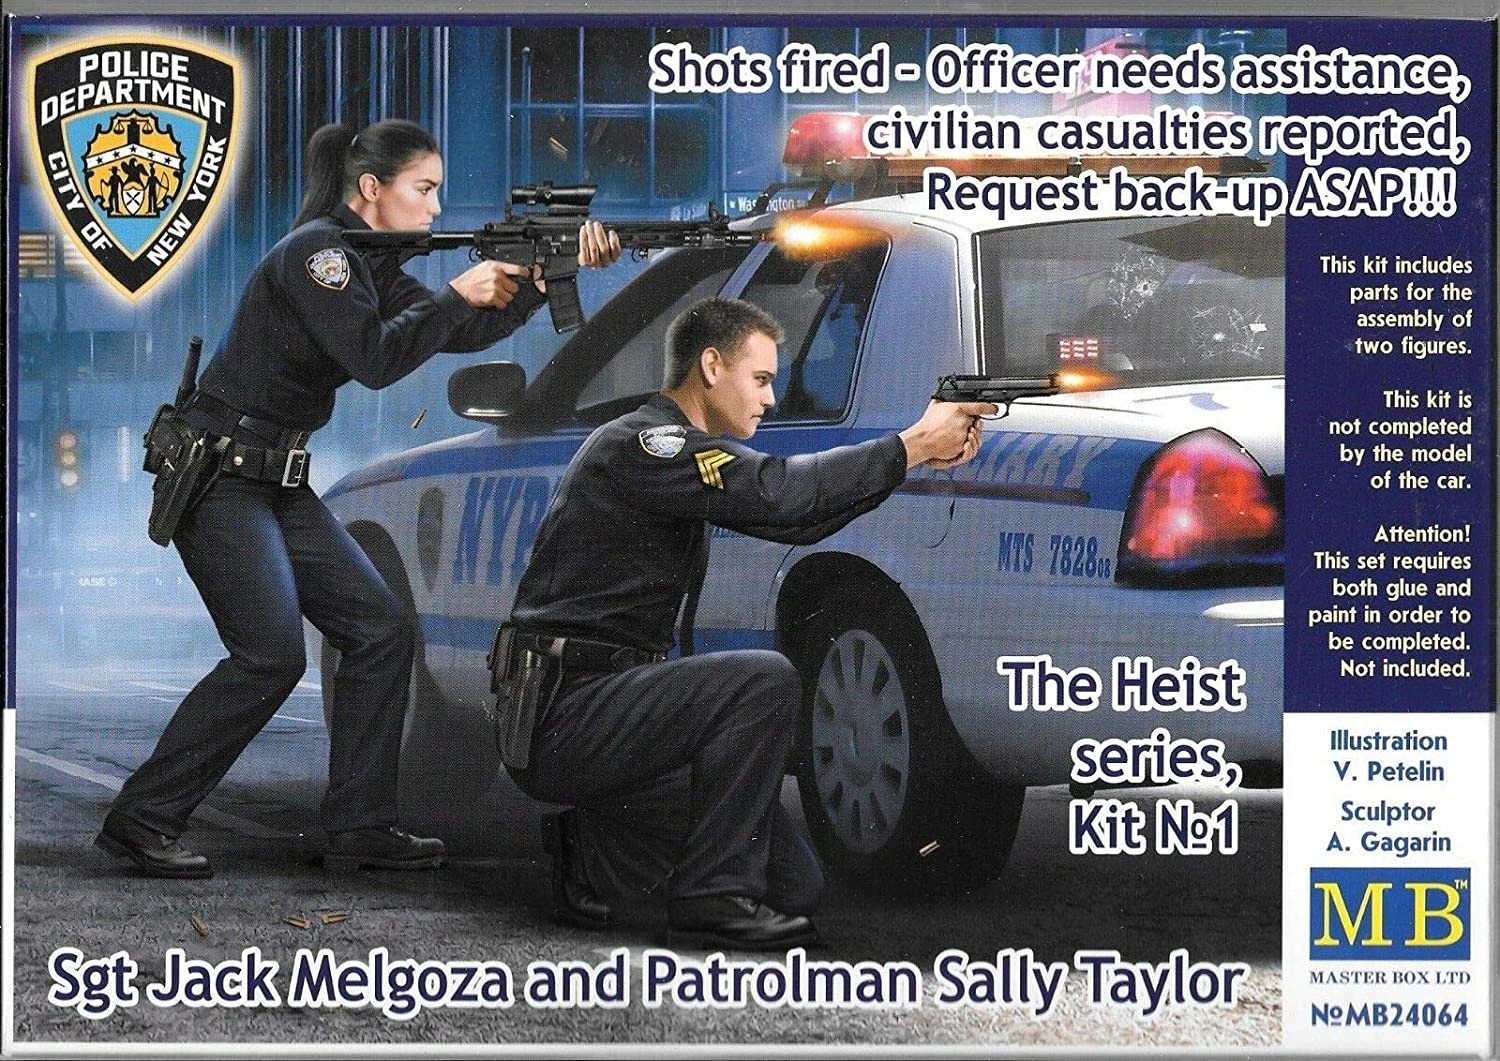 MASTER BOX 1/24 24064 “The Heist series, Kit №1. Shots fired – Officer needs assistance, civilian casualties reported, Request back-up ASAP!!! Sgt Jack Melgoza and Patrolman Sally Taylor”